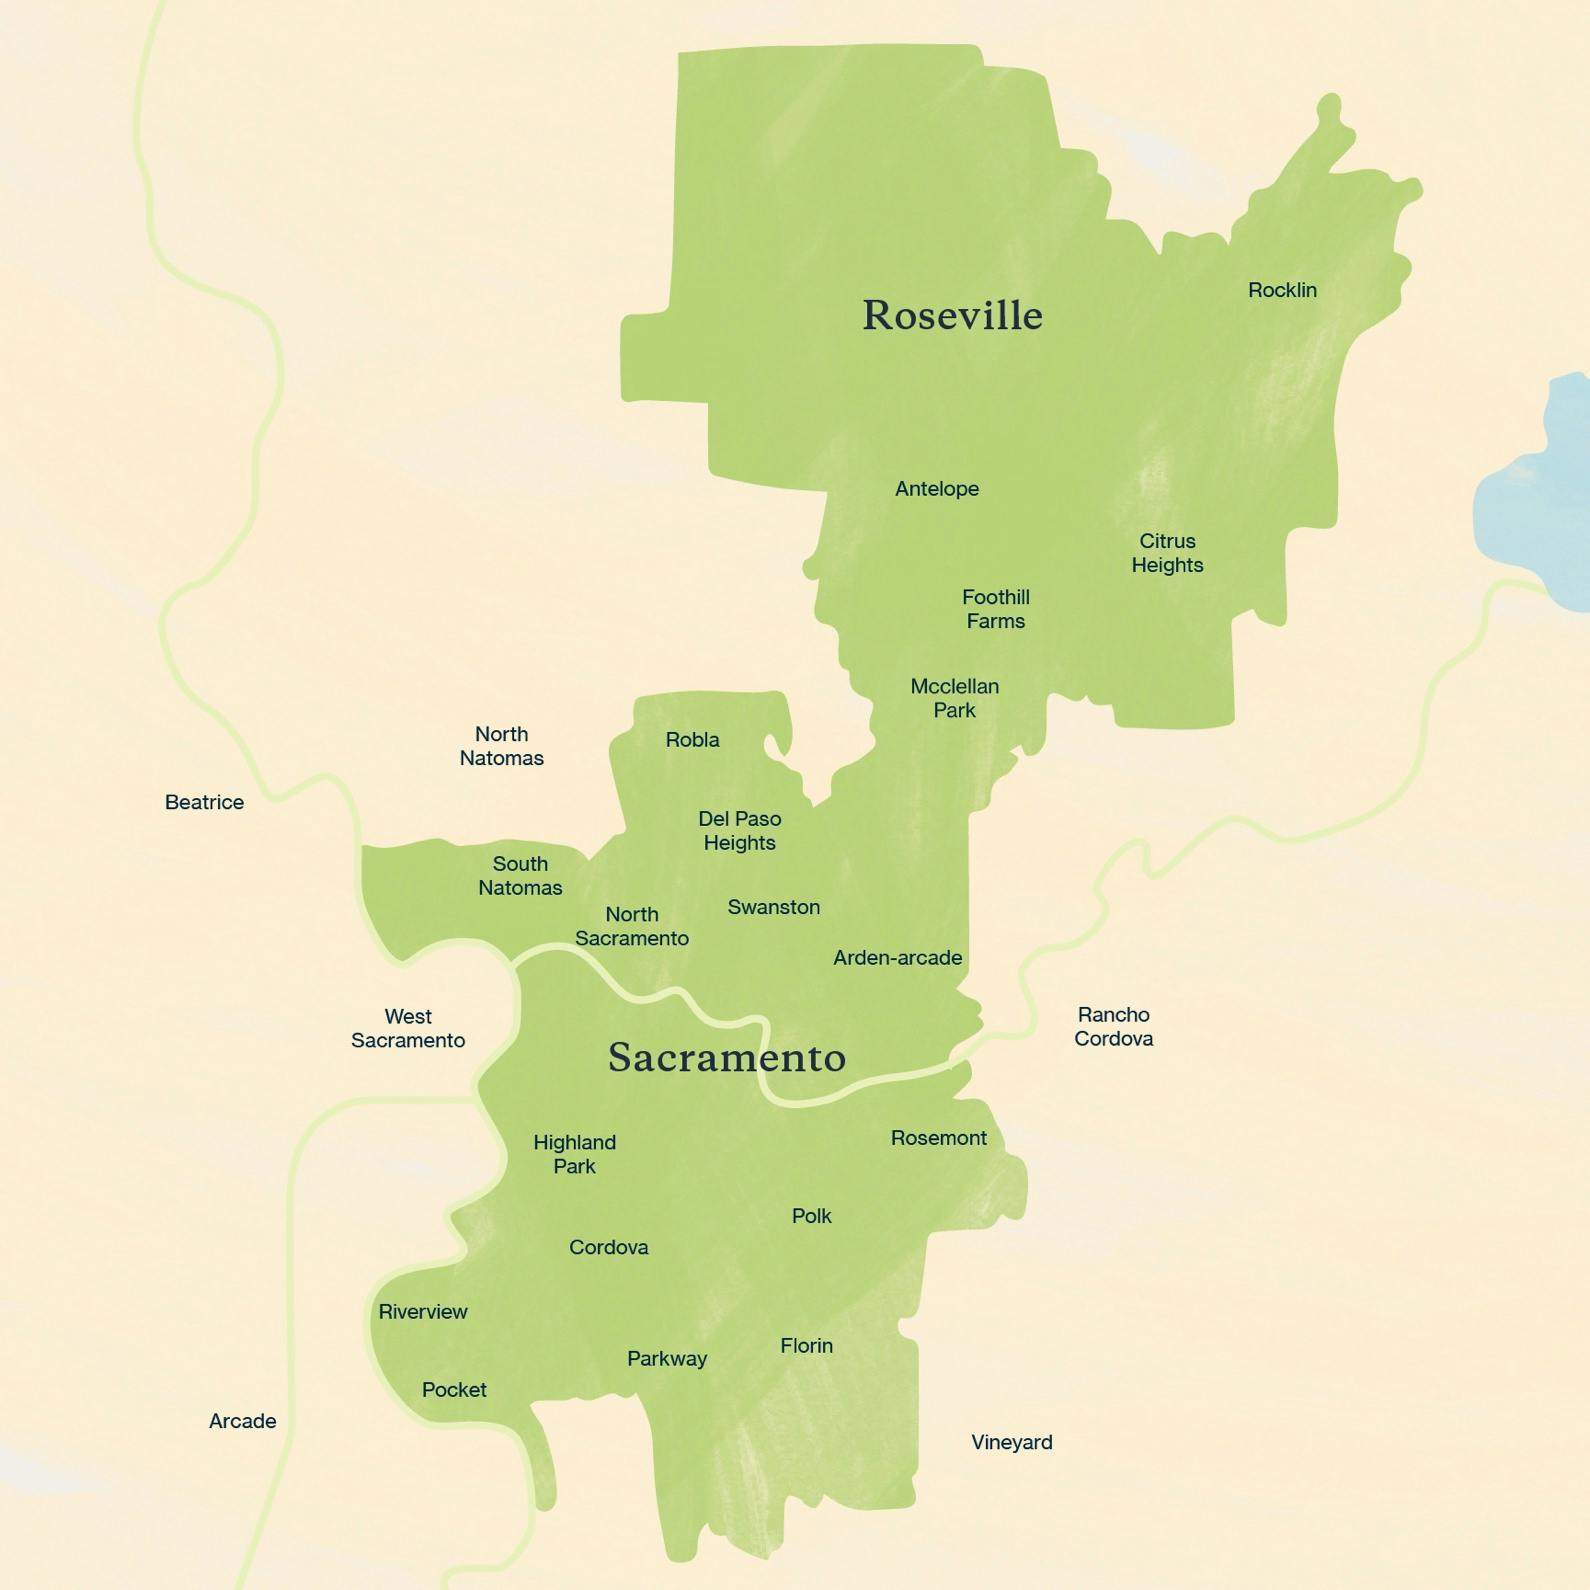 The Sacramento courier service zone is shown of green